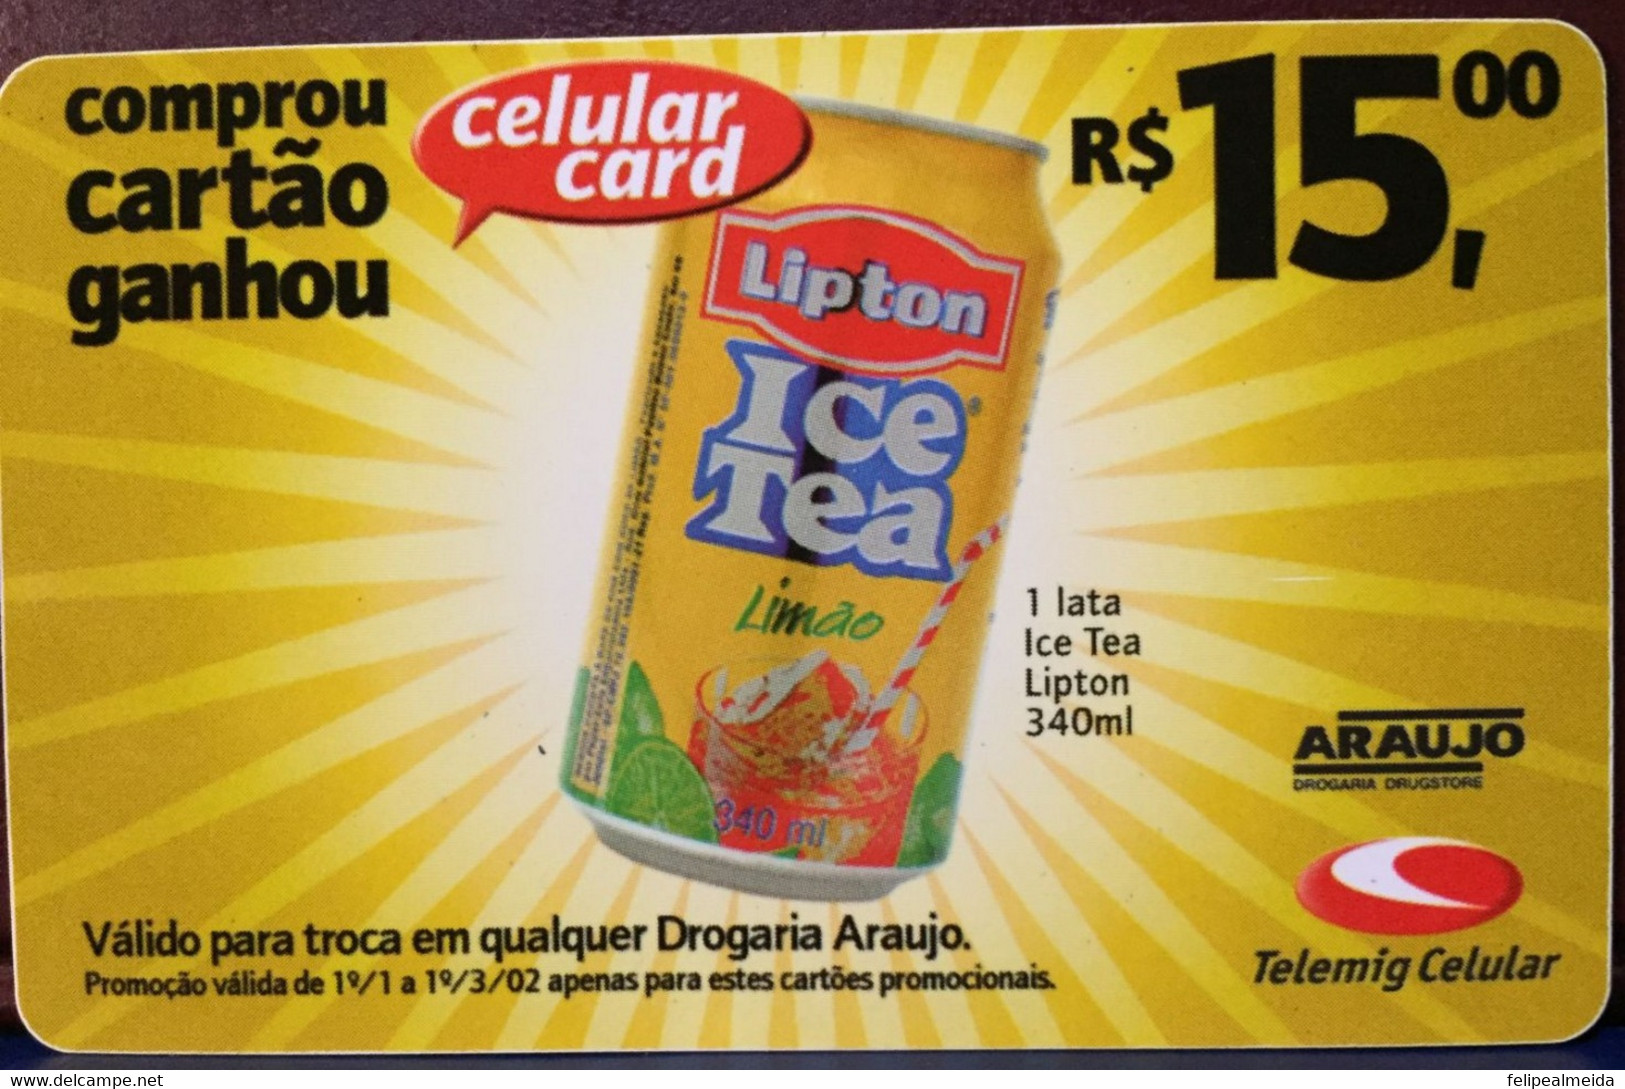 Phone Card Manufactured By Telemig Celular 2004 - 15 Reais De Credito, Promotion That Gave The Right To A Can Of Juice - Telekom-Betreiber